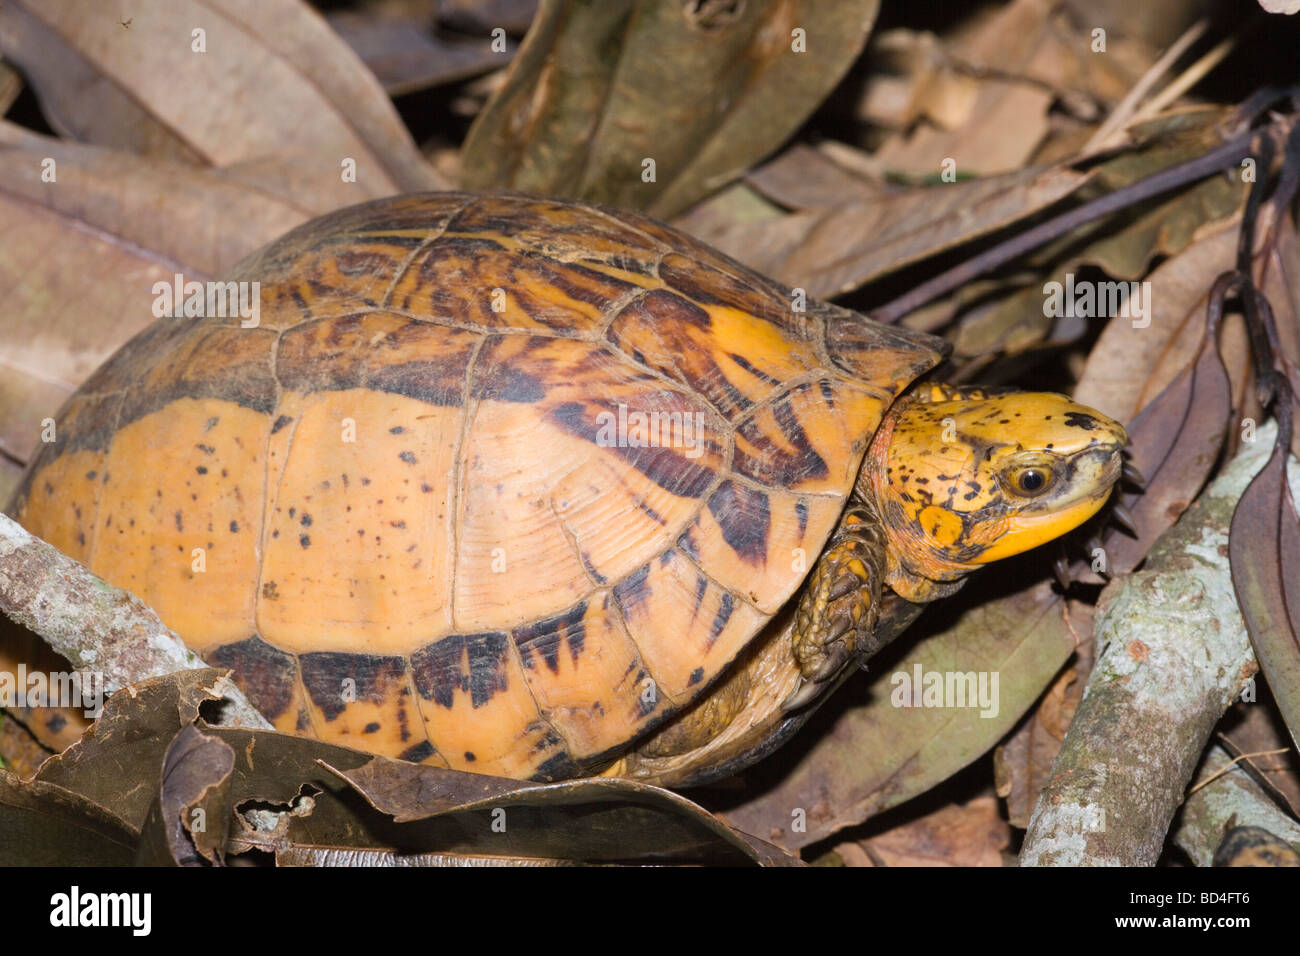 Indochinese Flowerback Box Turtle (Cuora galbinifrons). Head forelimbs emerging from between upper and lowered shell, plastron, opening. The typical yellow background colour of the carapace. Stock Photo